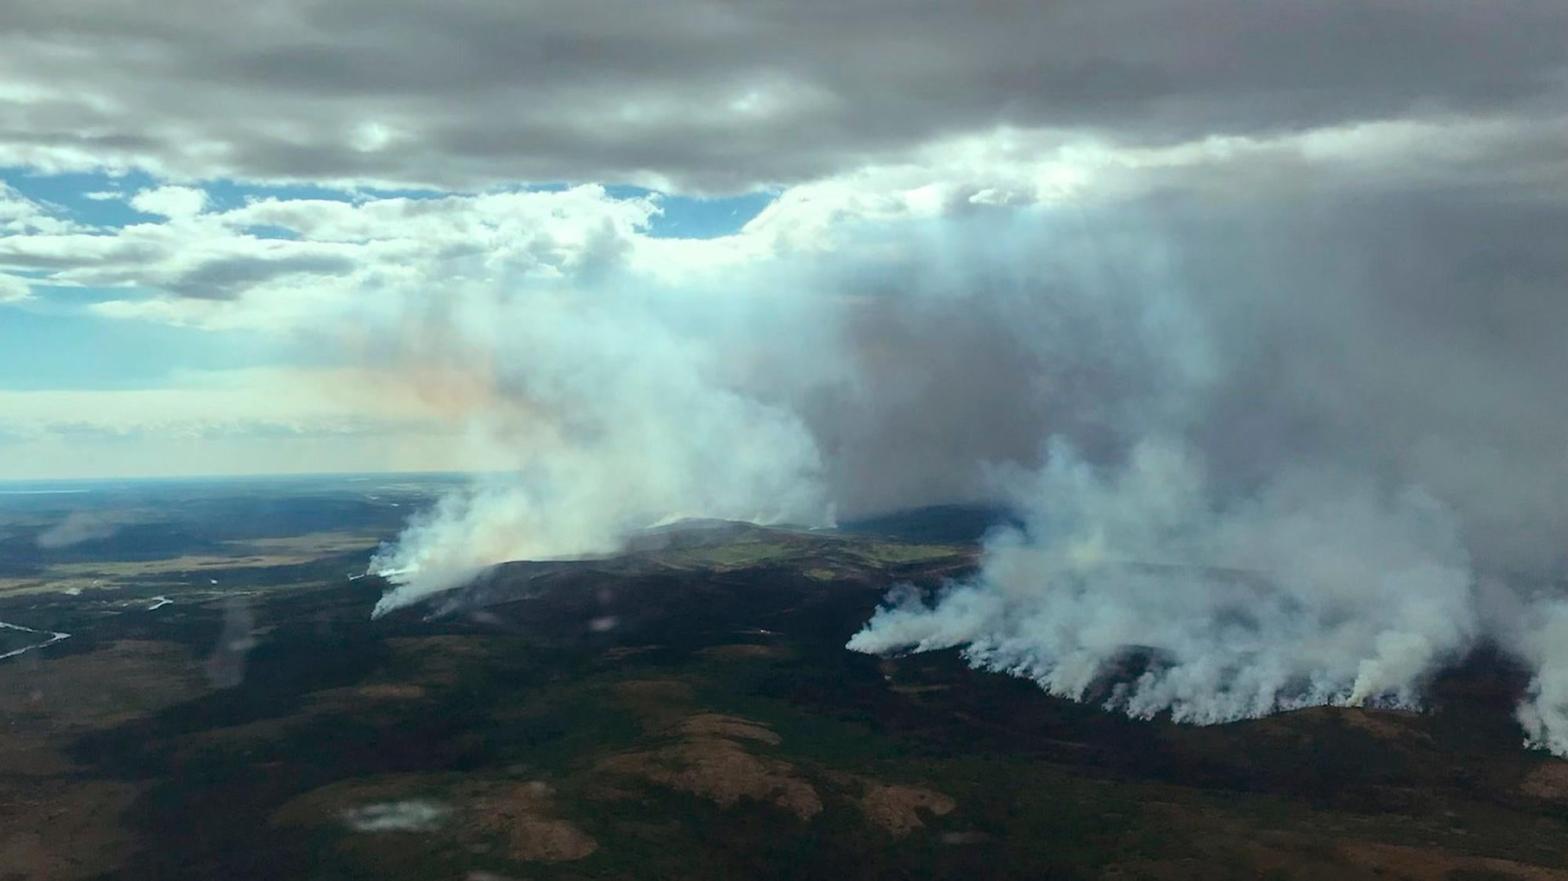 The east side of the East Fork Fire is seen near St. Mary's, Alaska in early June.  (Photo: BLM Alaska Fire Service, AP)